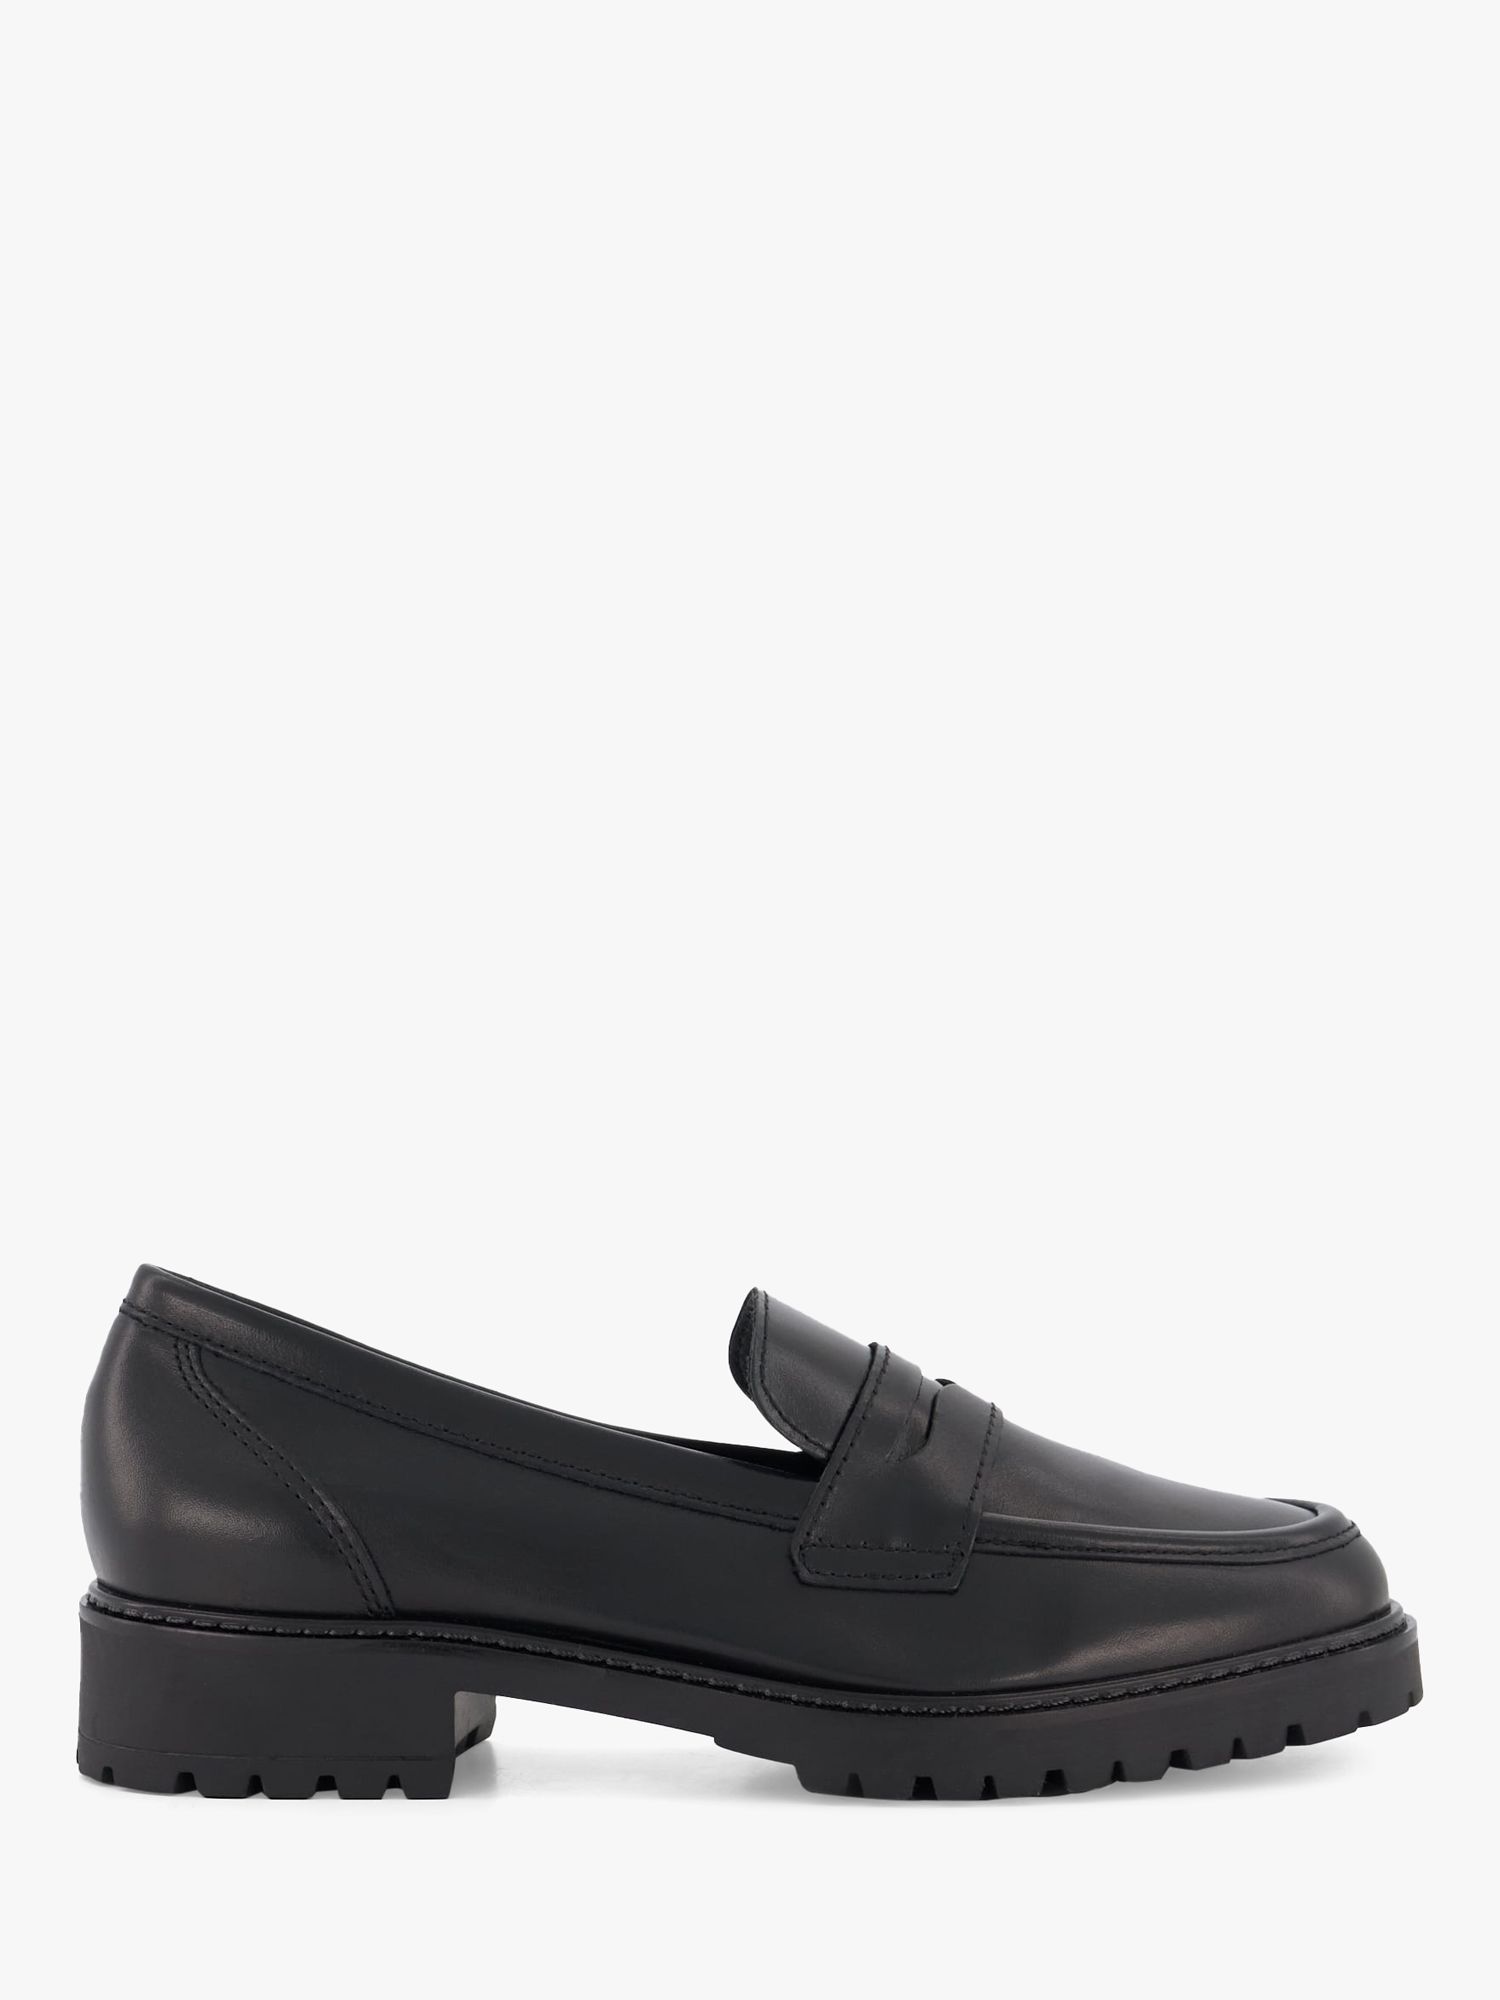 Buy Dune Gild Leather Cleated Penny Loafer Online at johnlewis.com